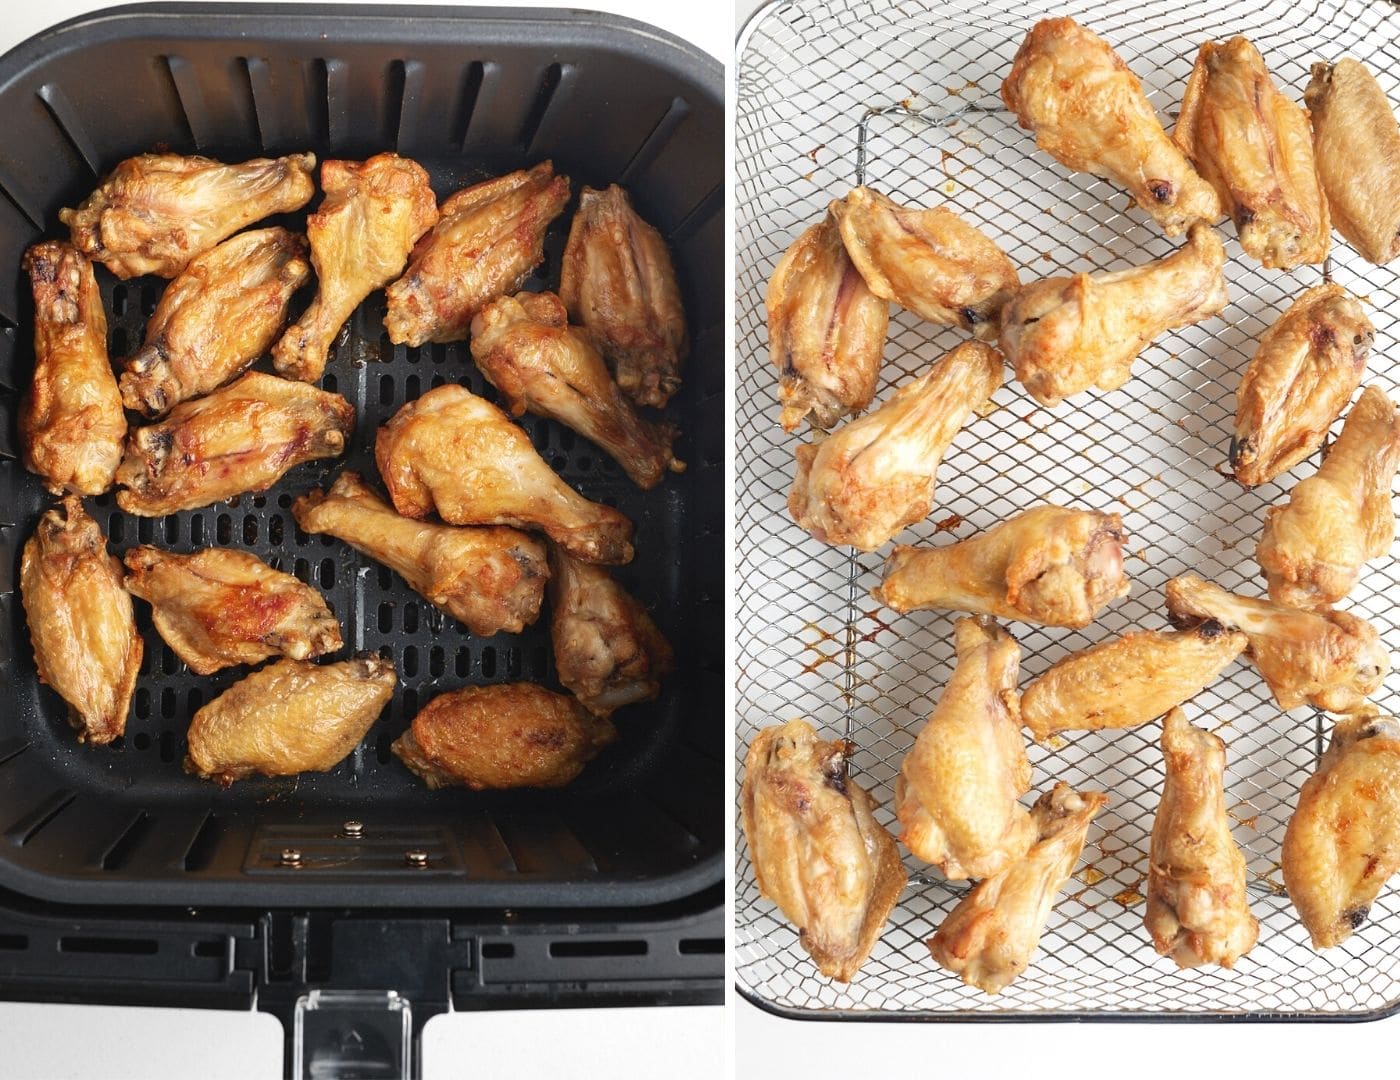 Air Fryer Vs Pan Frying: Which is Healthier and Tastier? 